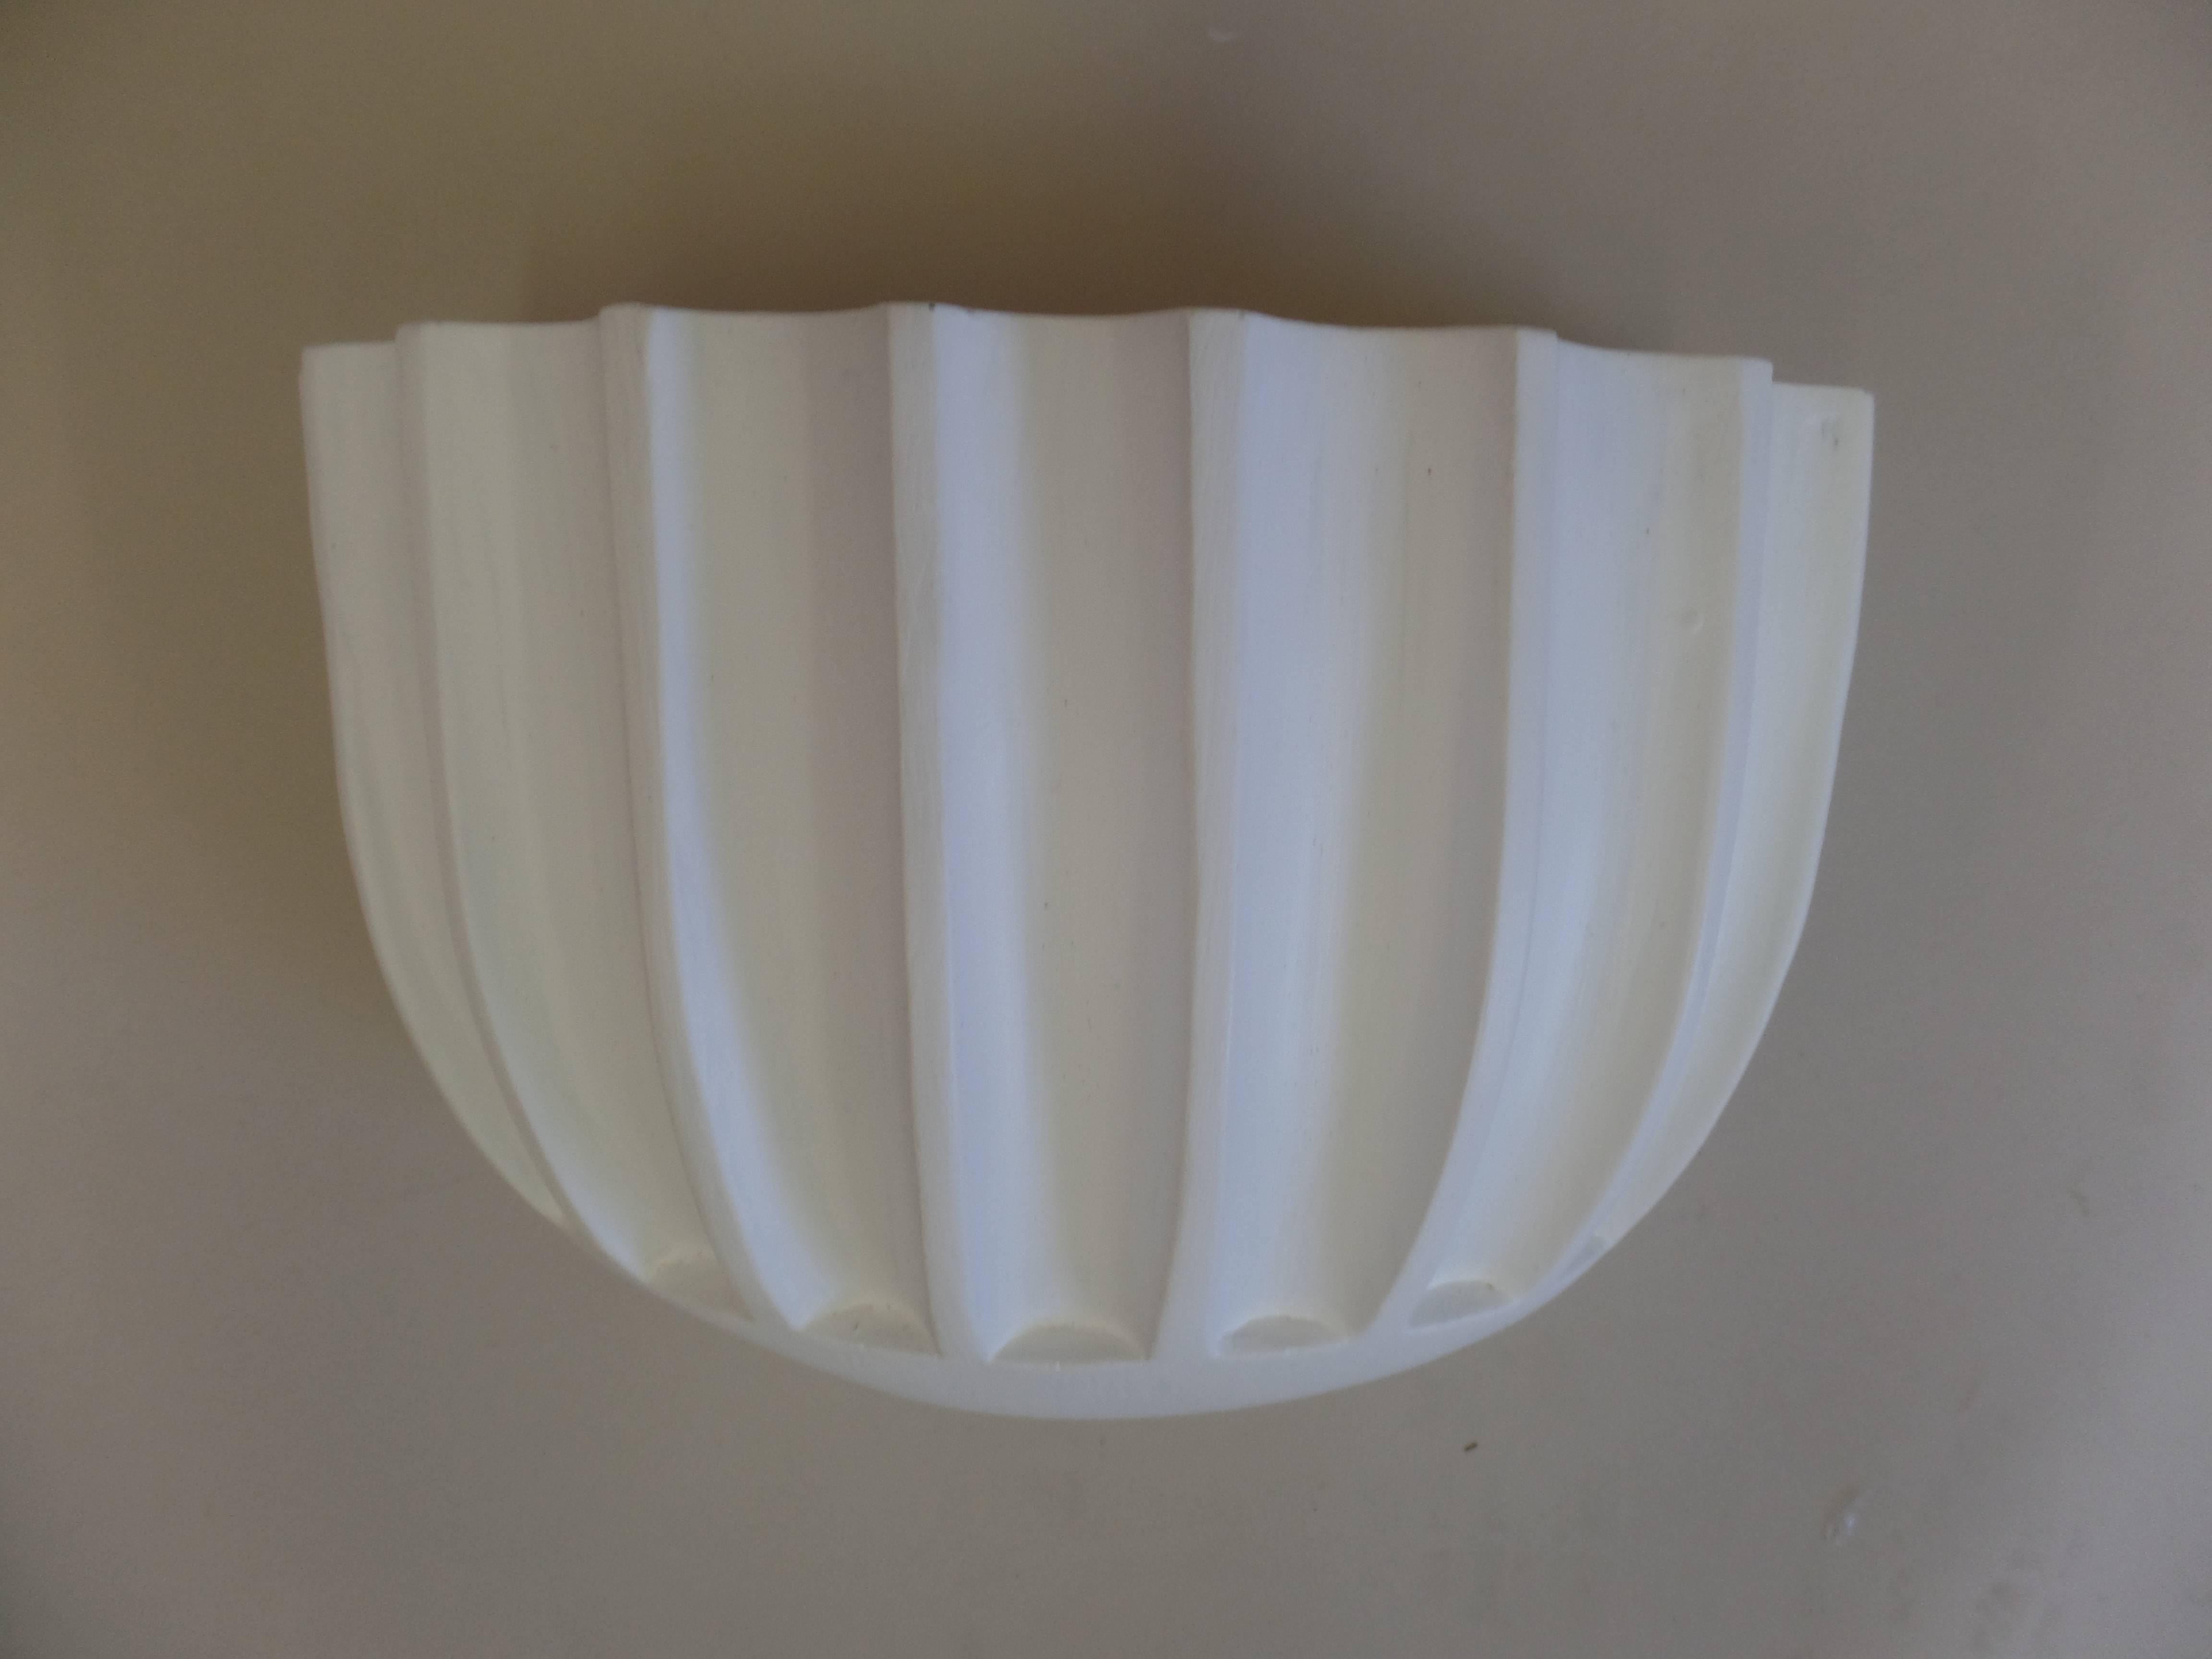 20th Century 2 Pairs of French Art Deco / Mid-Century Modern Plaster Wall Sconces For Sale